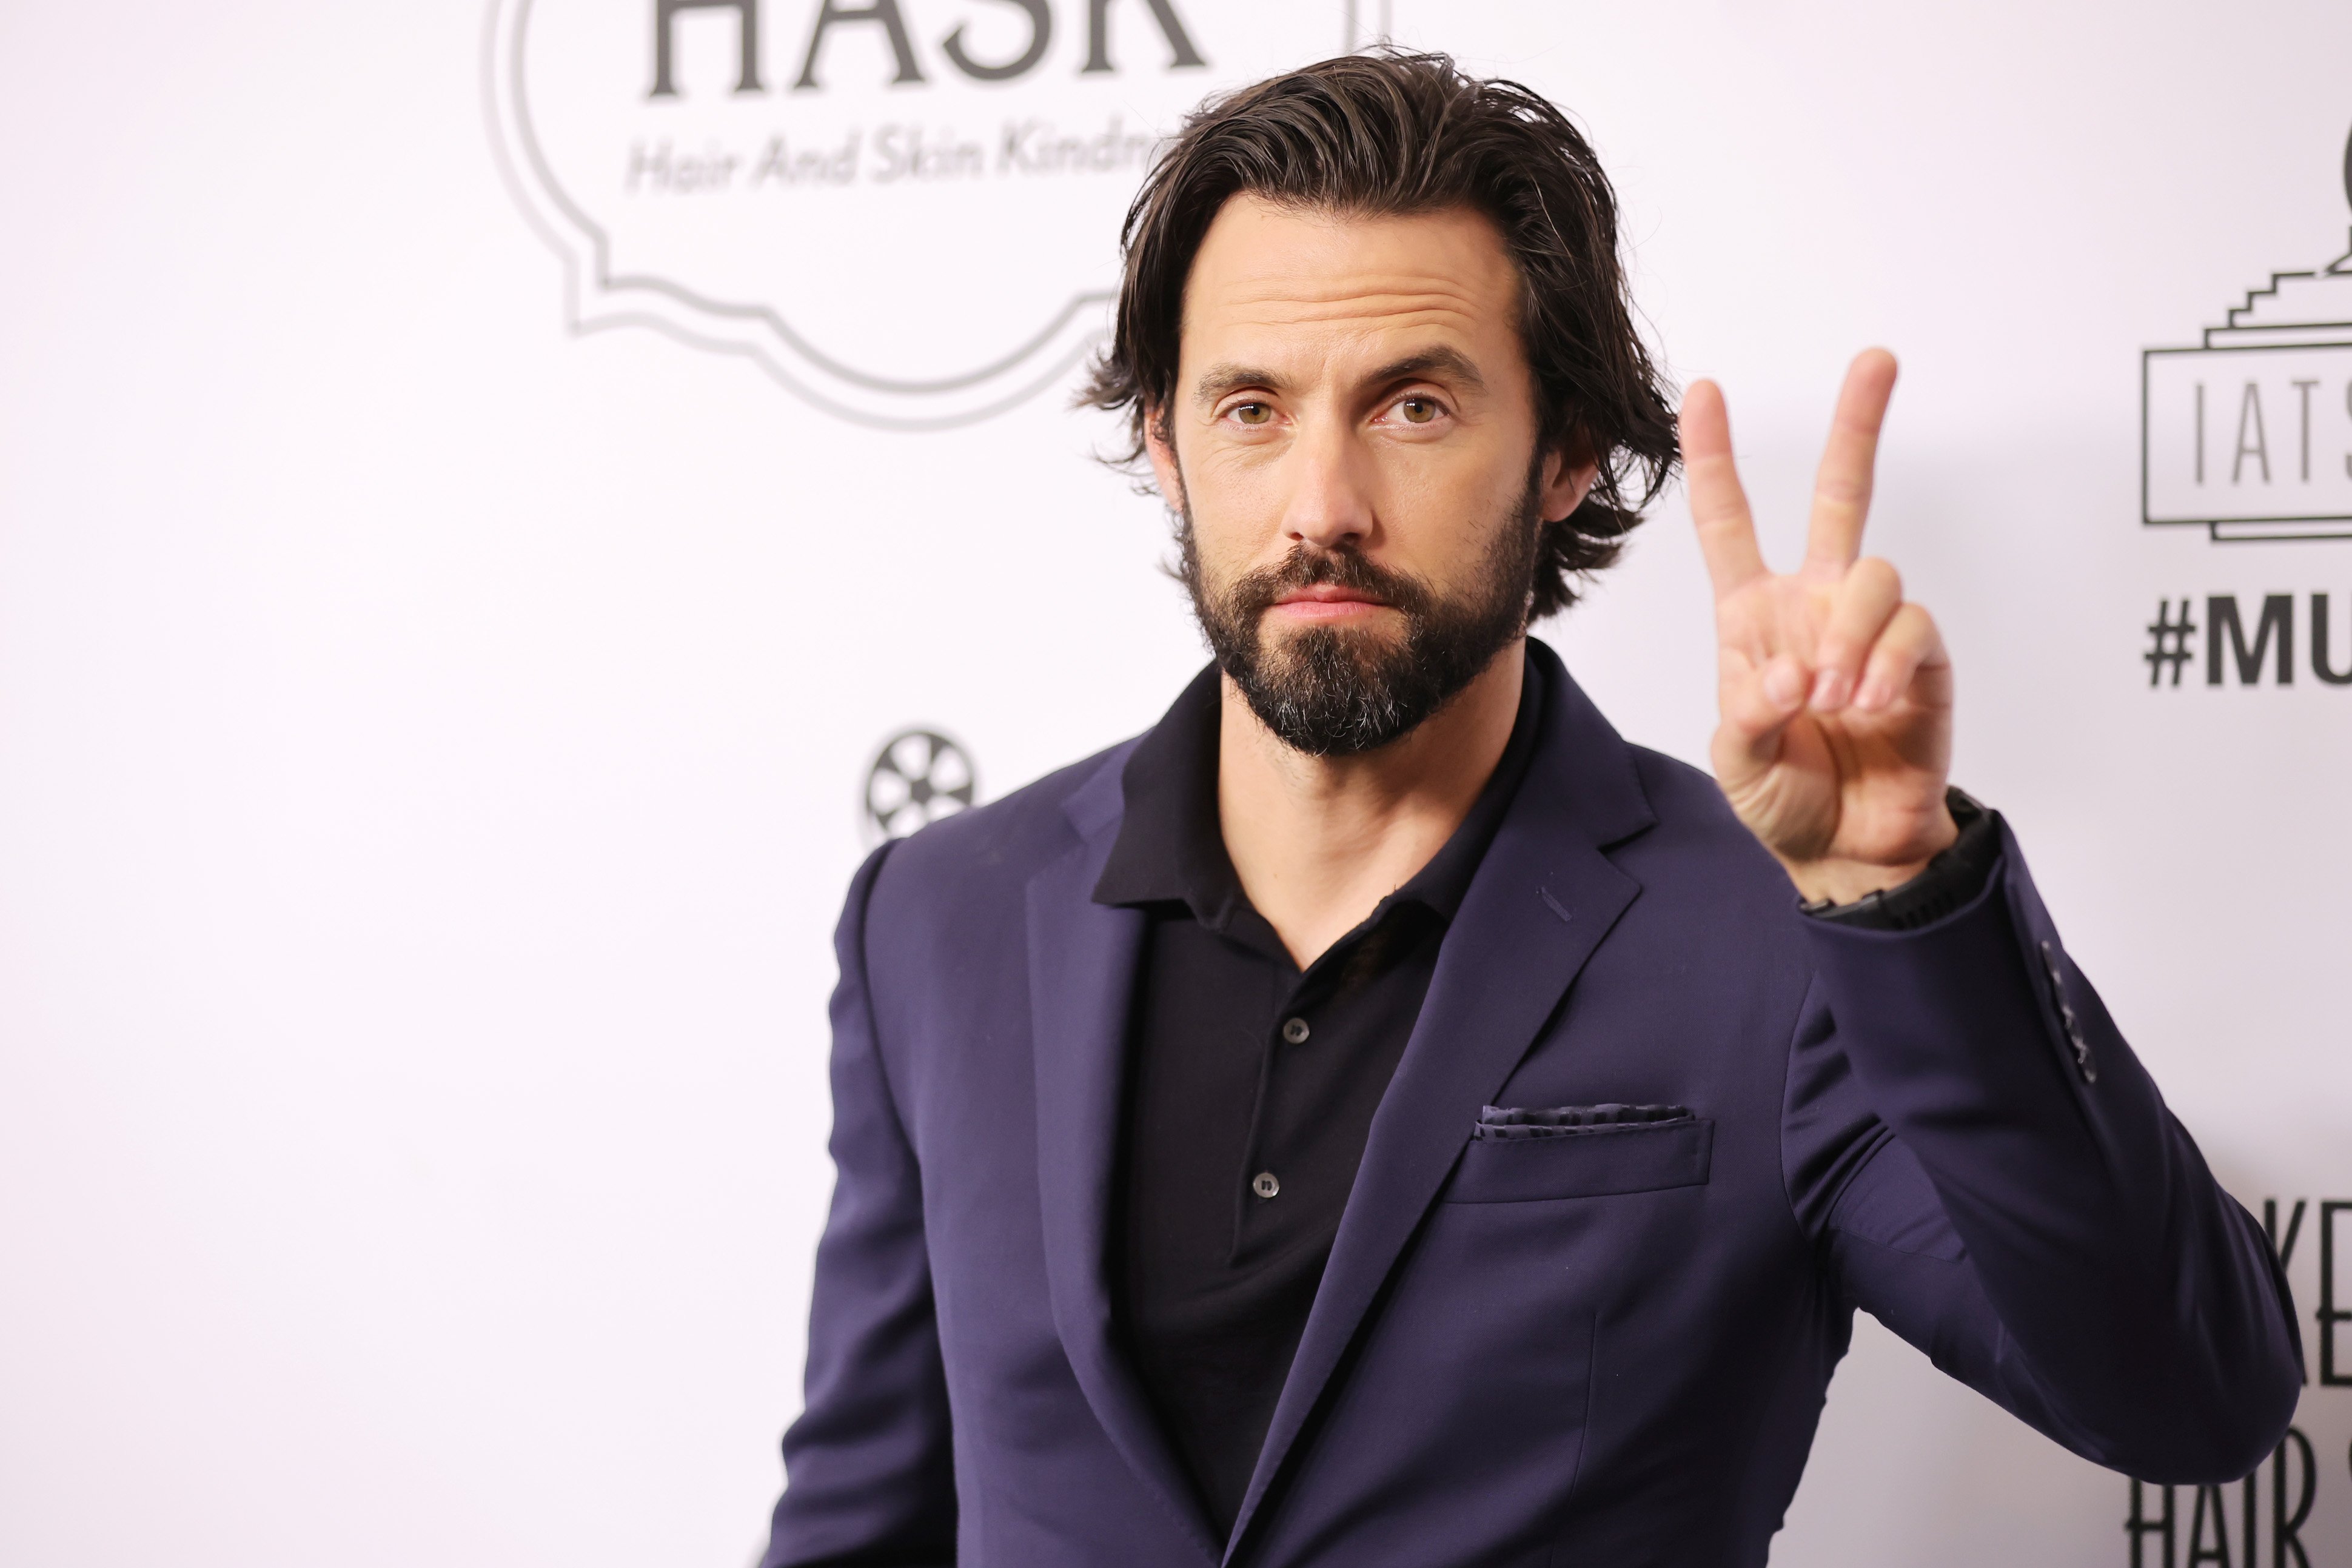 Milo Ventimiglia, star of 'This Is Us,' wears a dark blue suit over a black button-up shirt while holding up a peace sign.